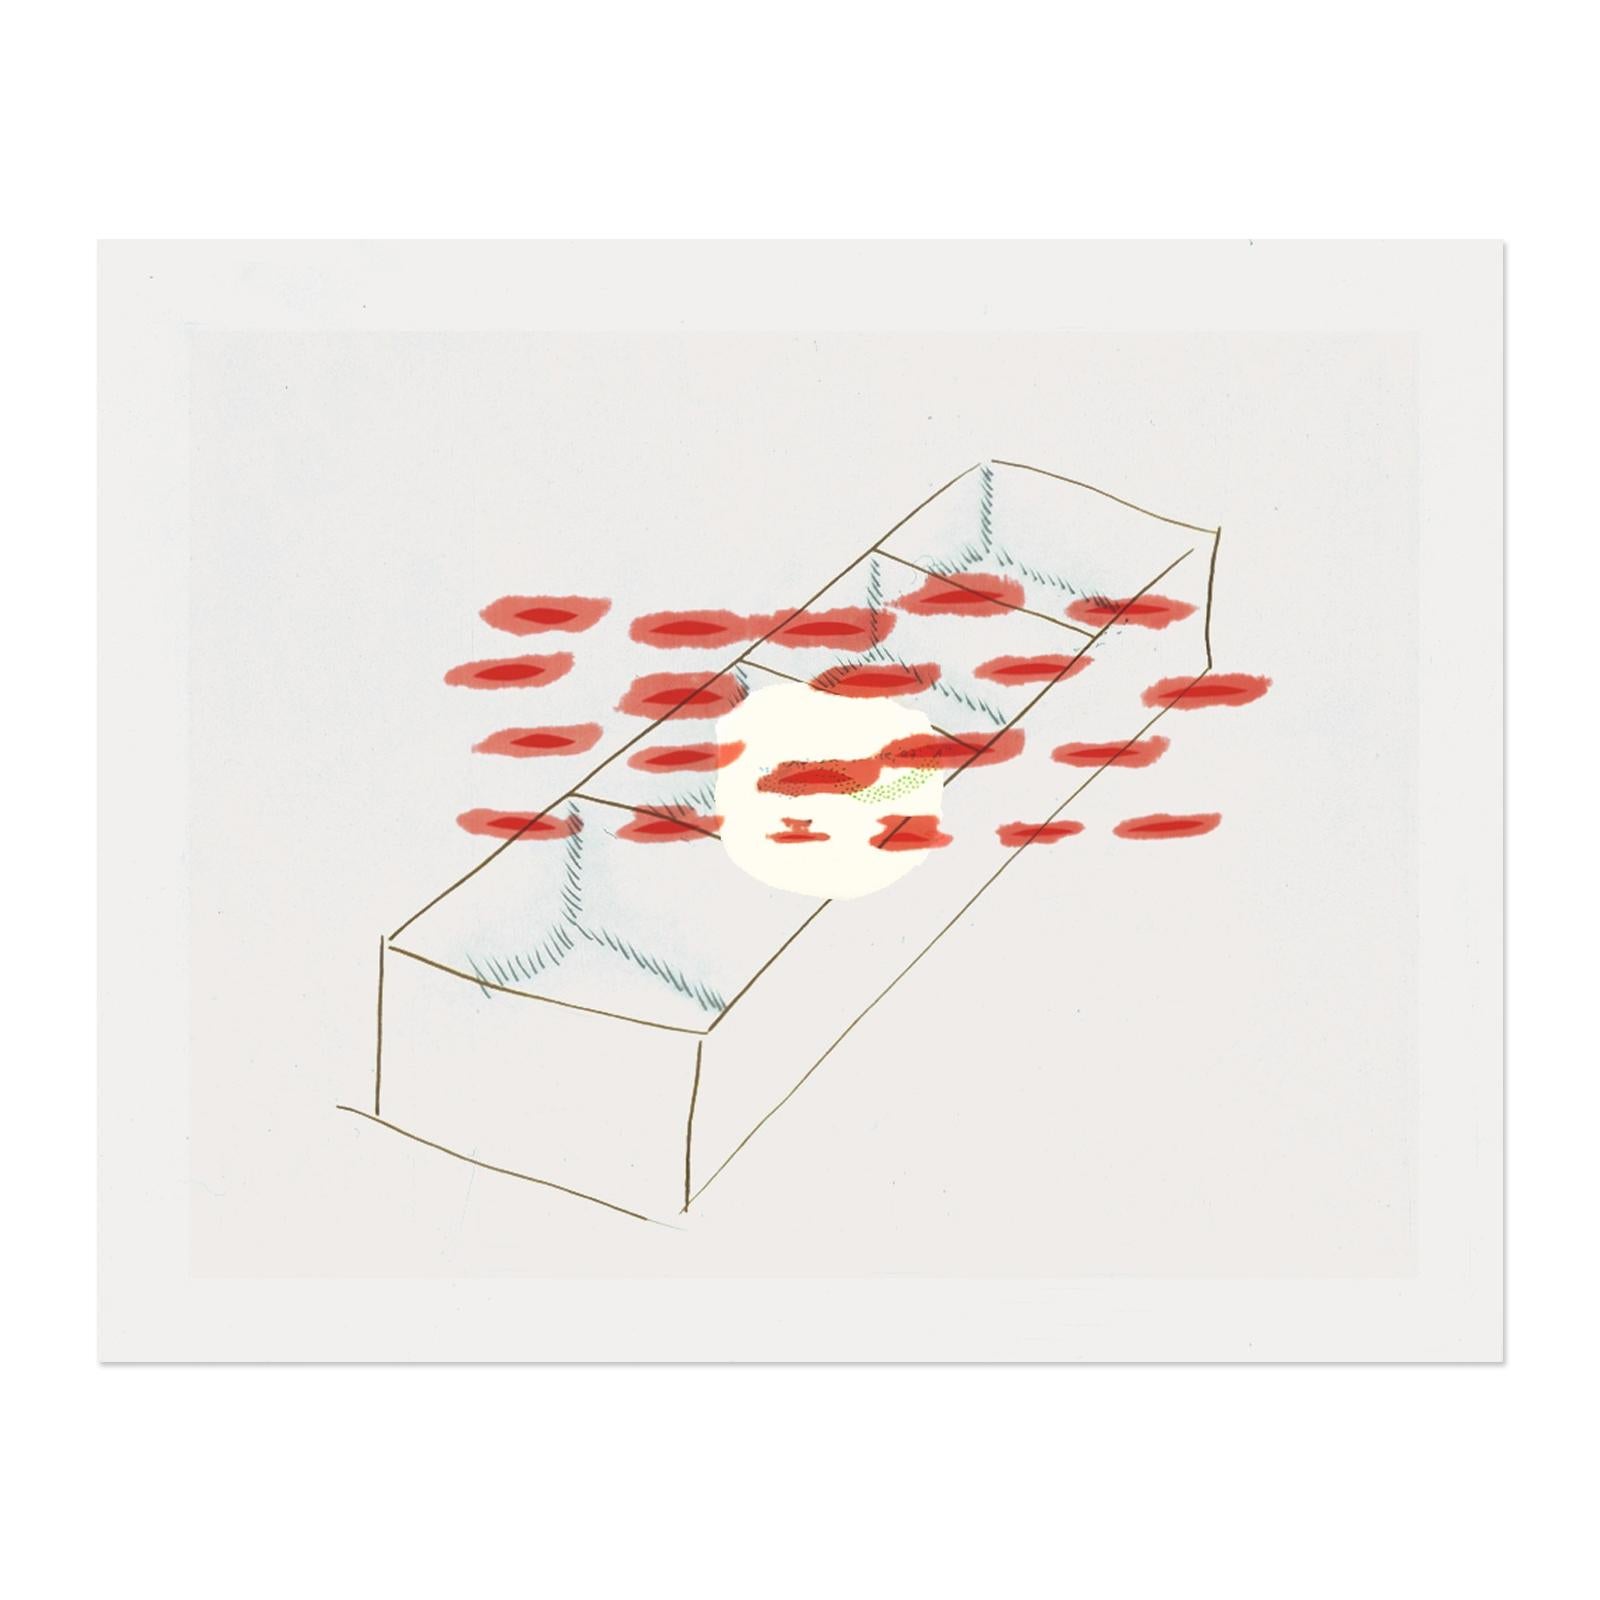 Richard Tuttle (American, born 1941)
Homesick as a Nail, 1998
Medium: Set of 1 drypoint etching on wove paper and 1 silkscreen, printed in five colors on acetate on both sides, with hand-colored additions
Dimensions: each 40 x 50 cm (15¾ x